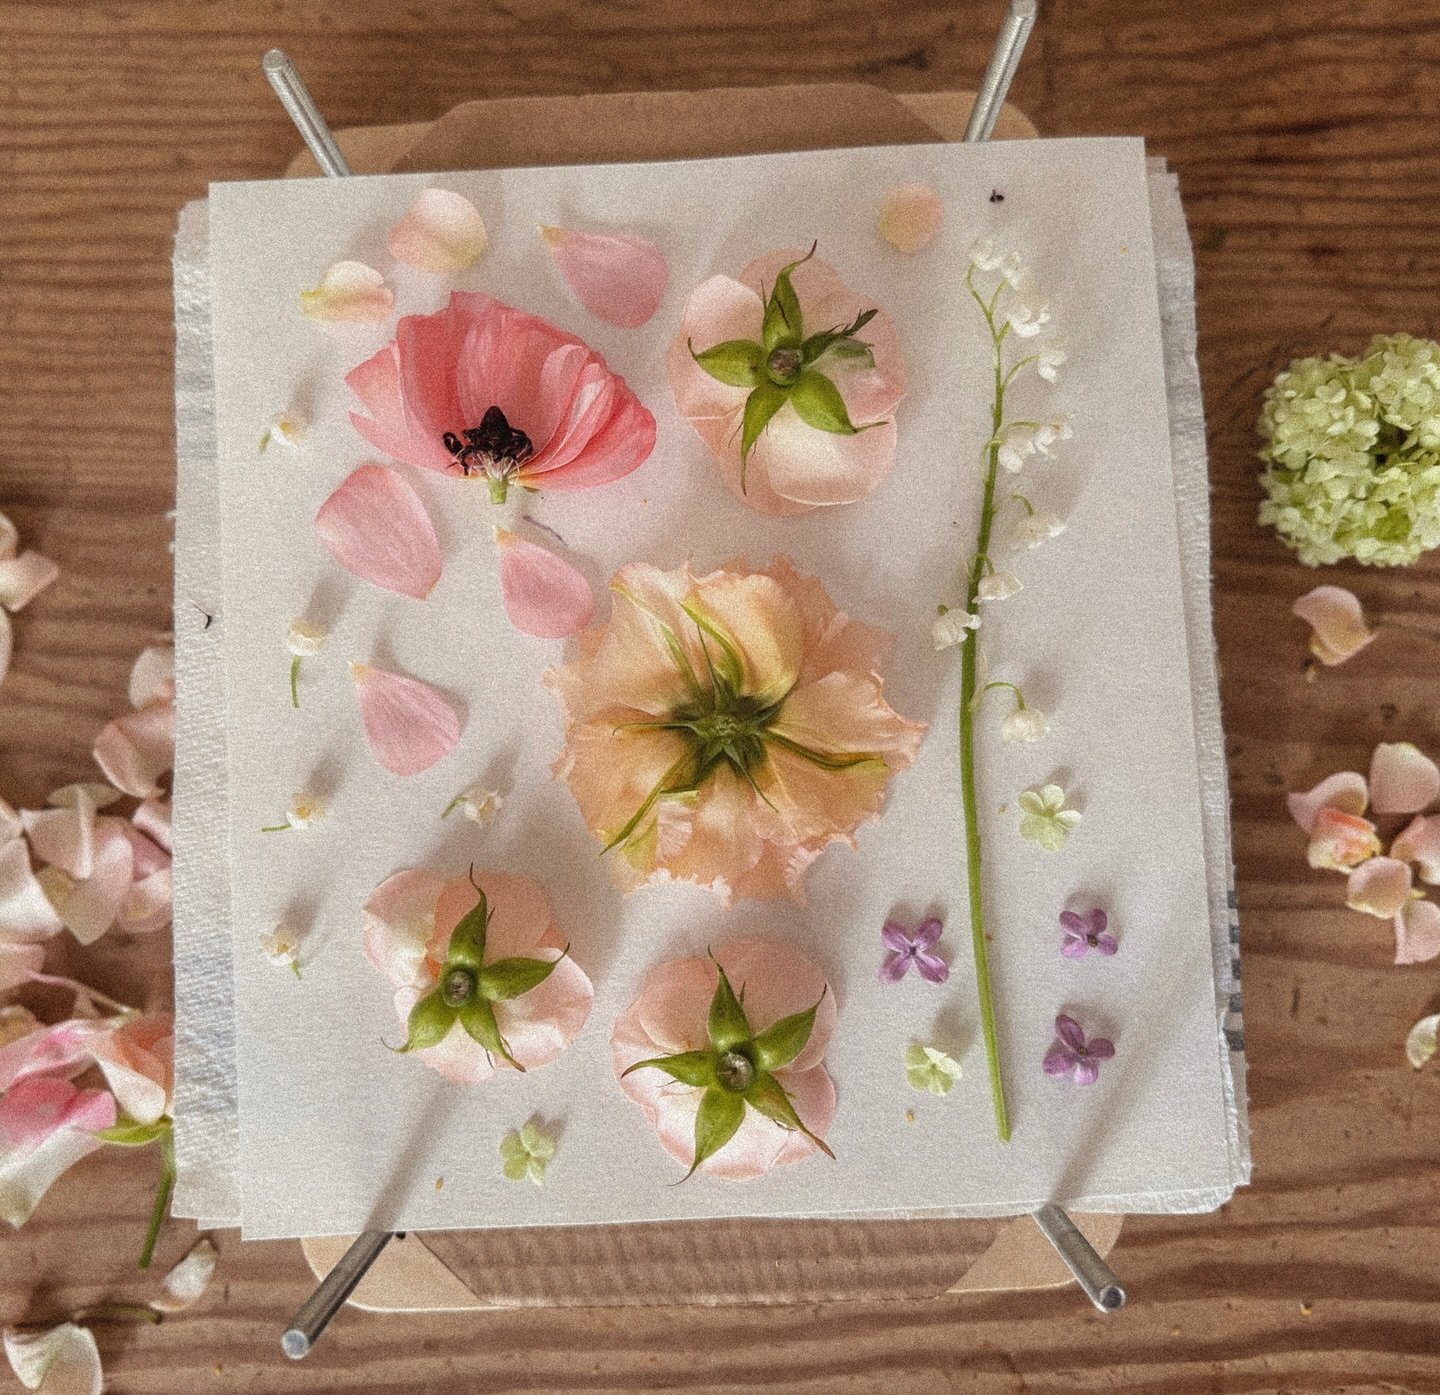 Exploring the art of pressing flowers has become a cherished pastime, enabling me to capture the beauty of nature in its delicate forms. I&rsquo;m honoured to extend this passion into crafting bespoke commissions exclusively for my couples, preservin